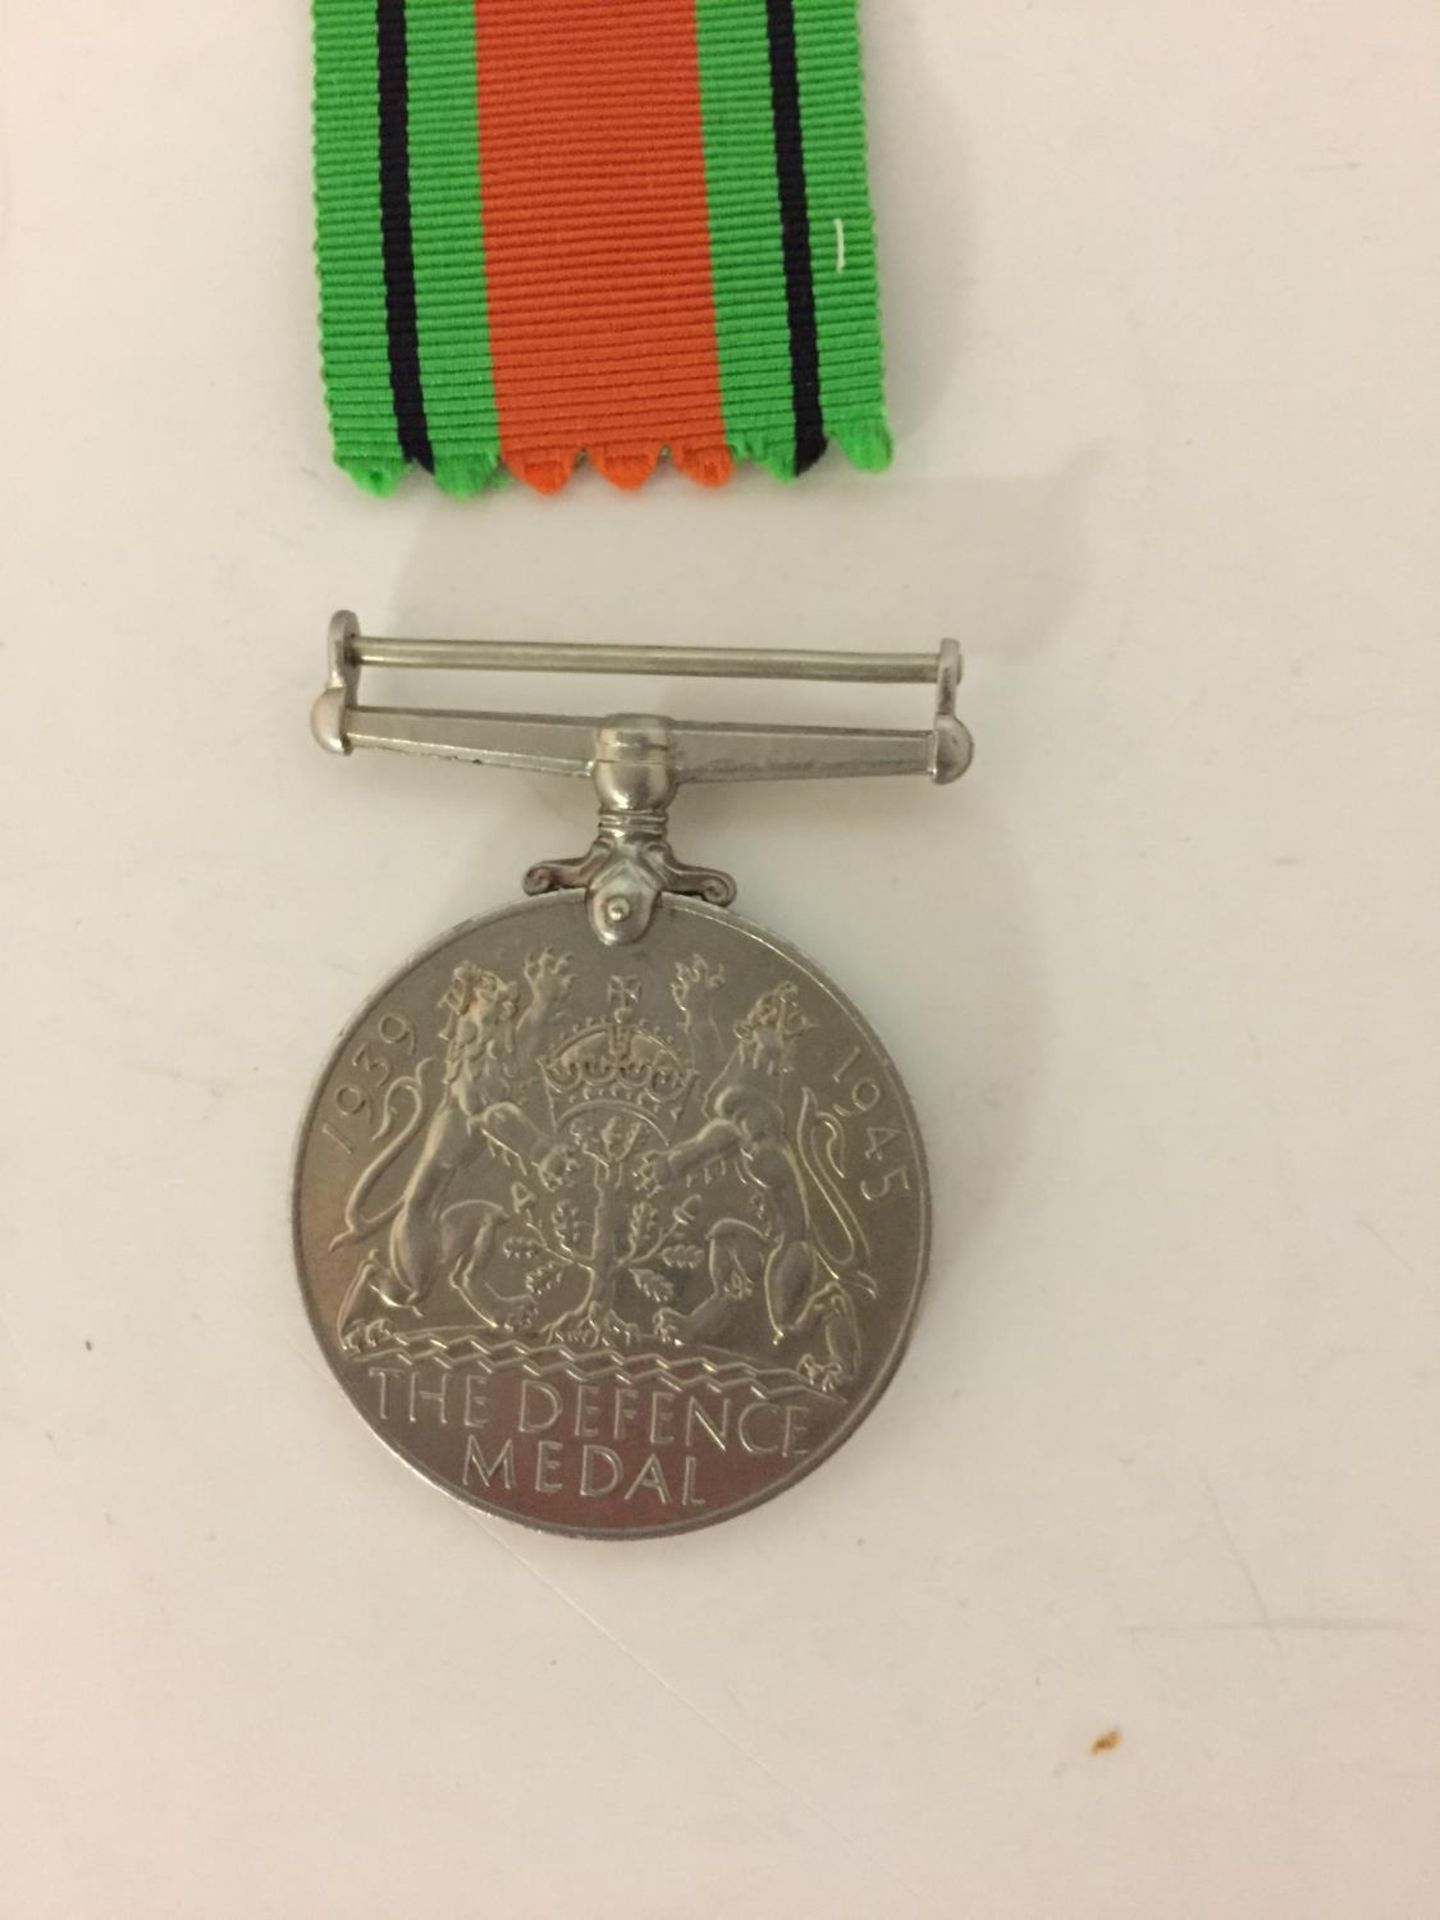 A 1939-1945 MEDAL AND DEFENCE MEDAL - Image 3 of 5